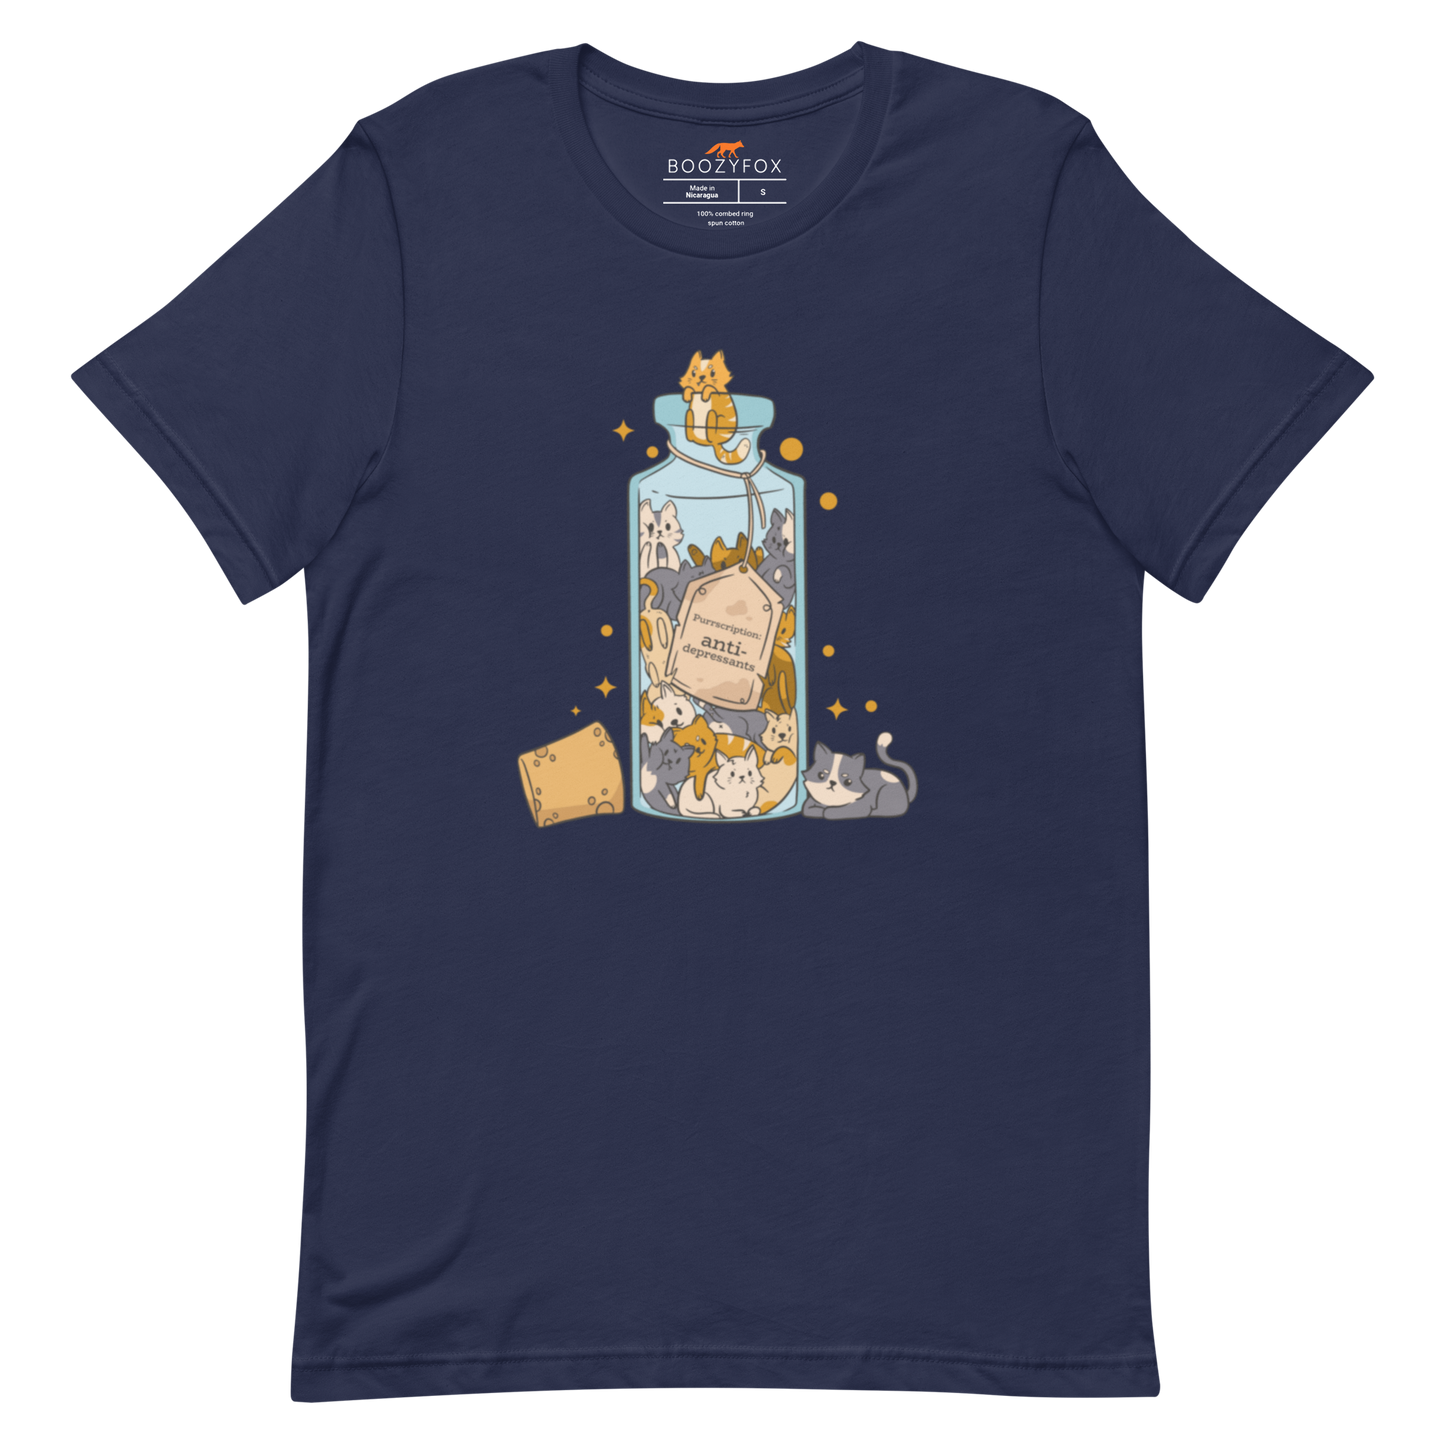 Navy Premium Cat T-Shirt featuring a funny Anti-Depressants graphic on the chest - Cute Graphic Cat Tees - Boozy Fox